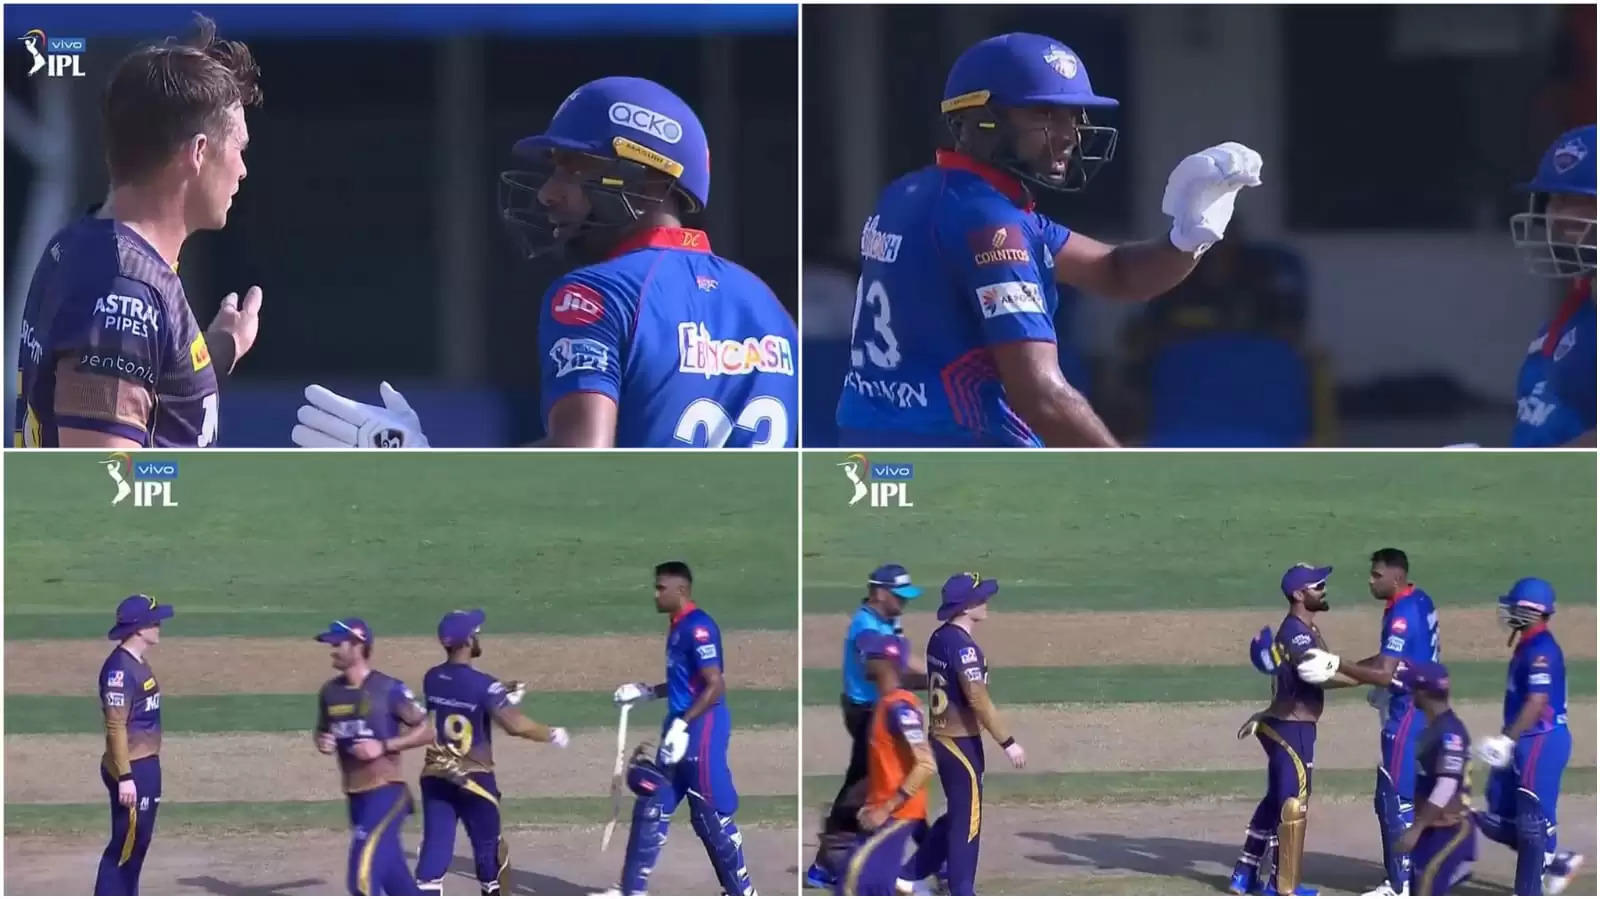 WATCH: Ashwin in heated face-off with Southee & Morgan; DK rushes to stop Ash